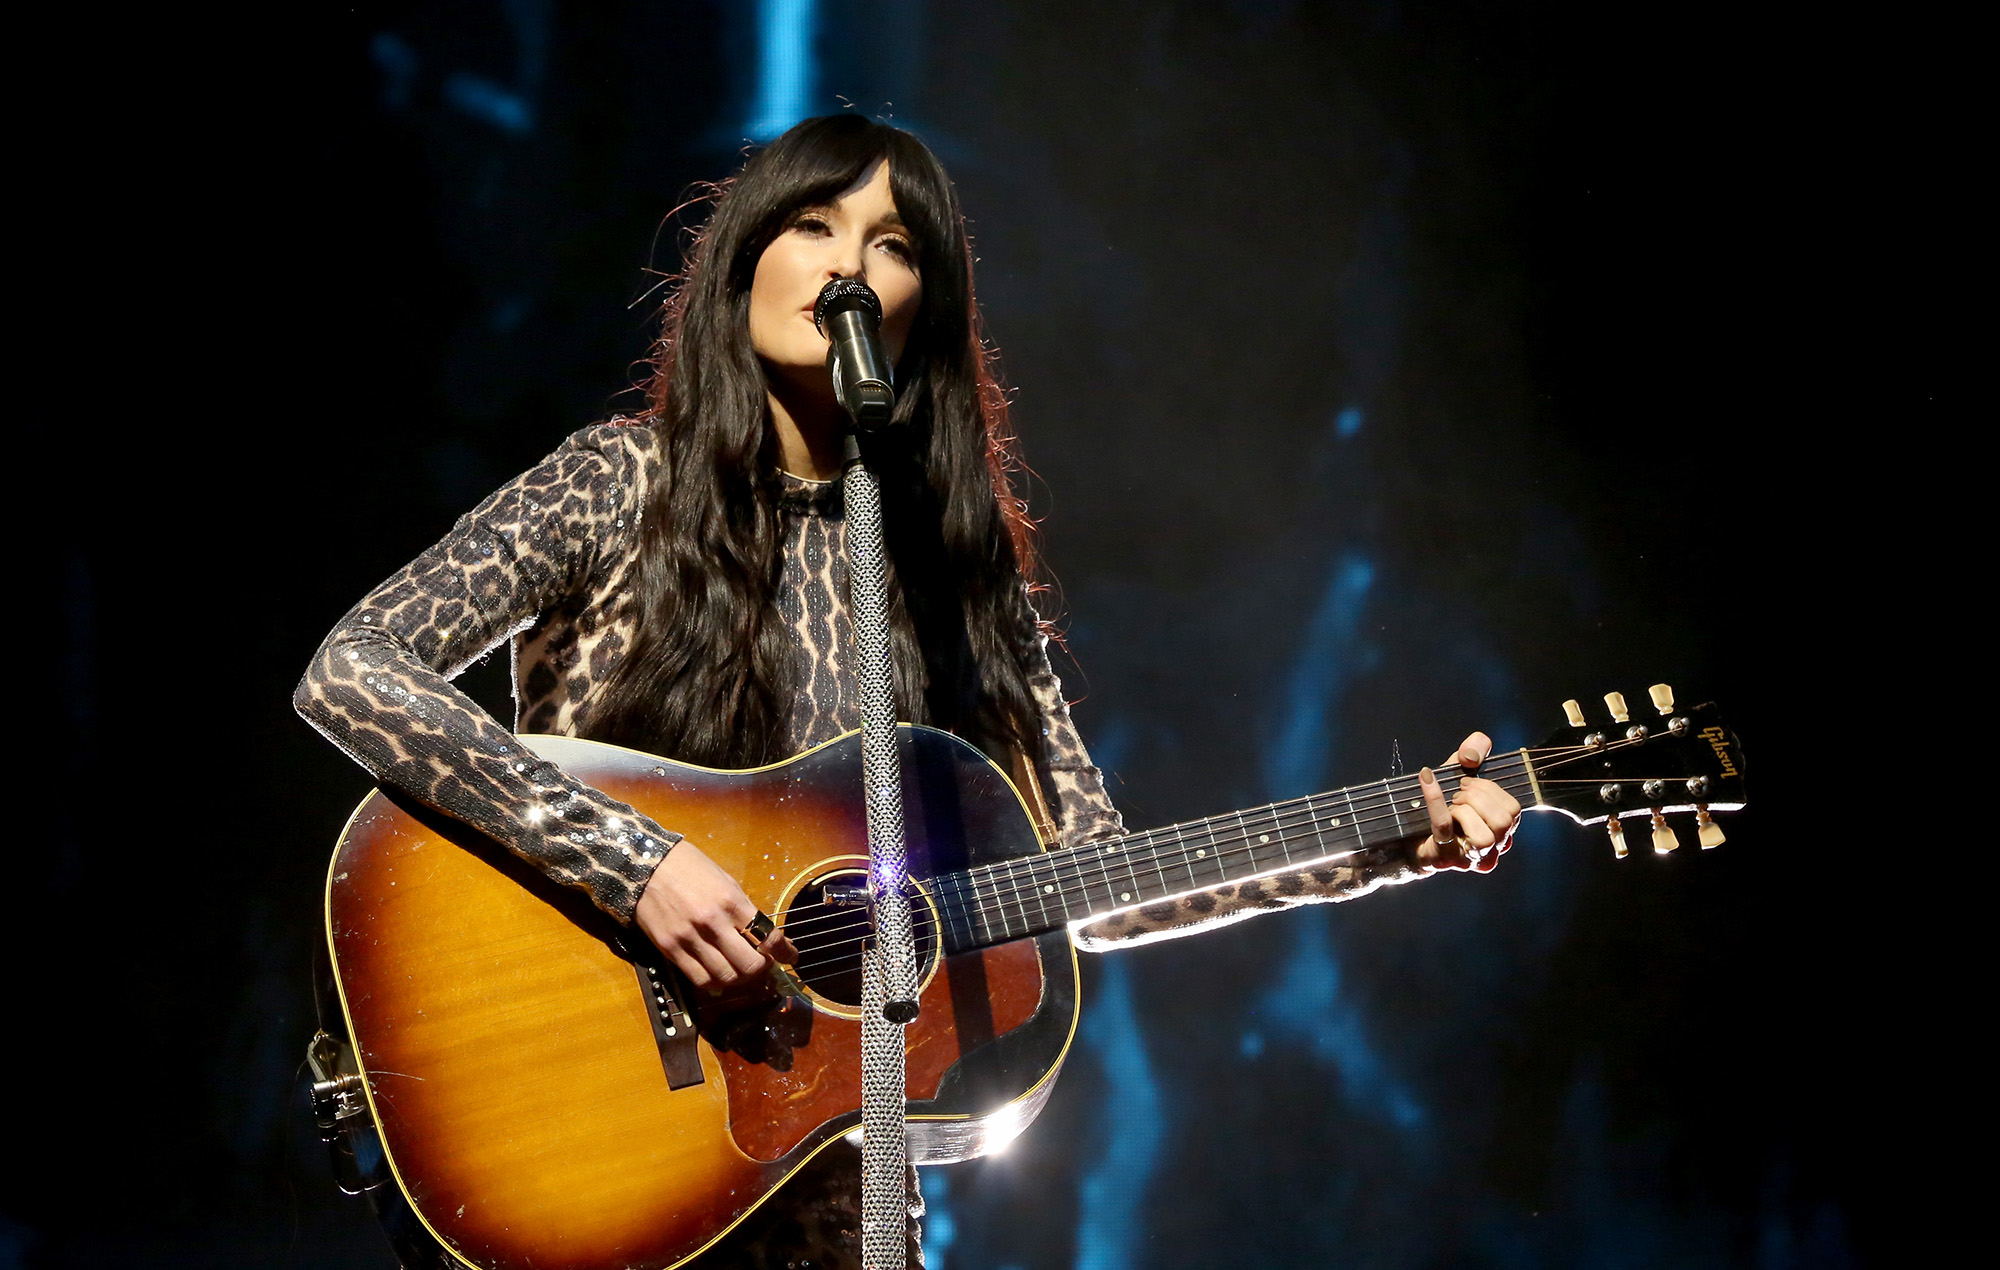 Kacey Musgraves Covers Dolly Parton’s “9 To 5” During Her Recent Show Stop (Watch)